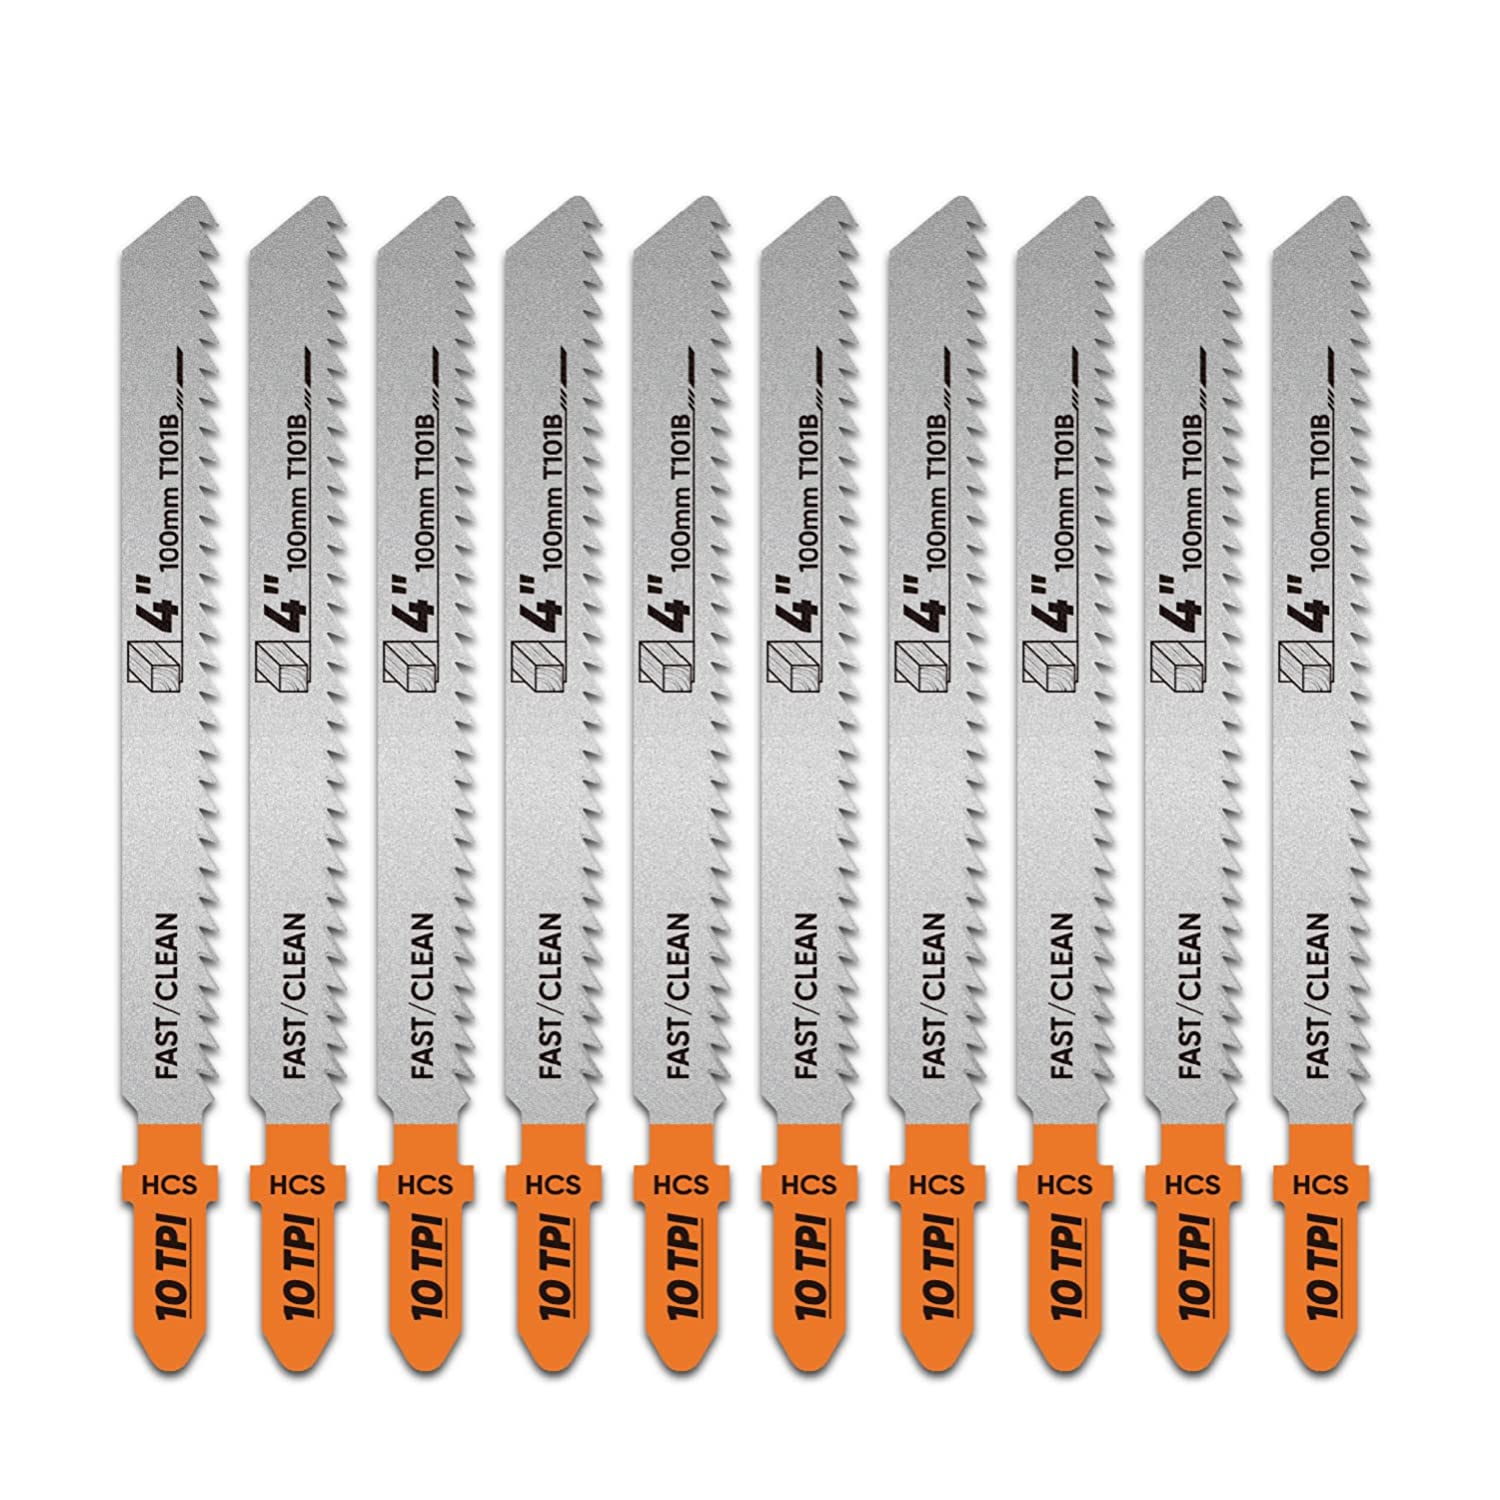 Augtouf T-Shank Jigsaw Blades for Wood Metal Multi-purpose